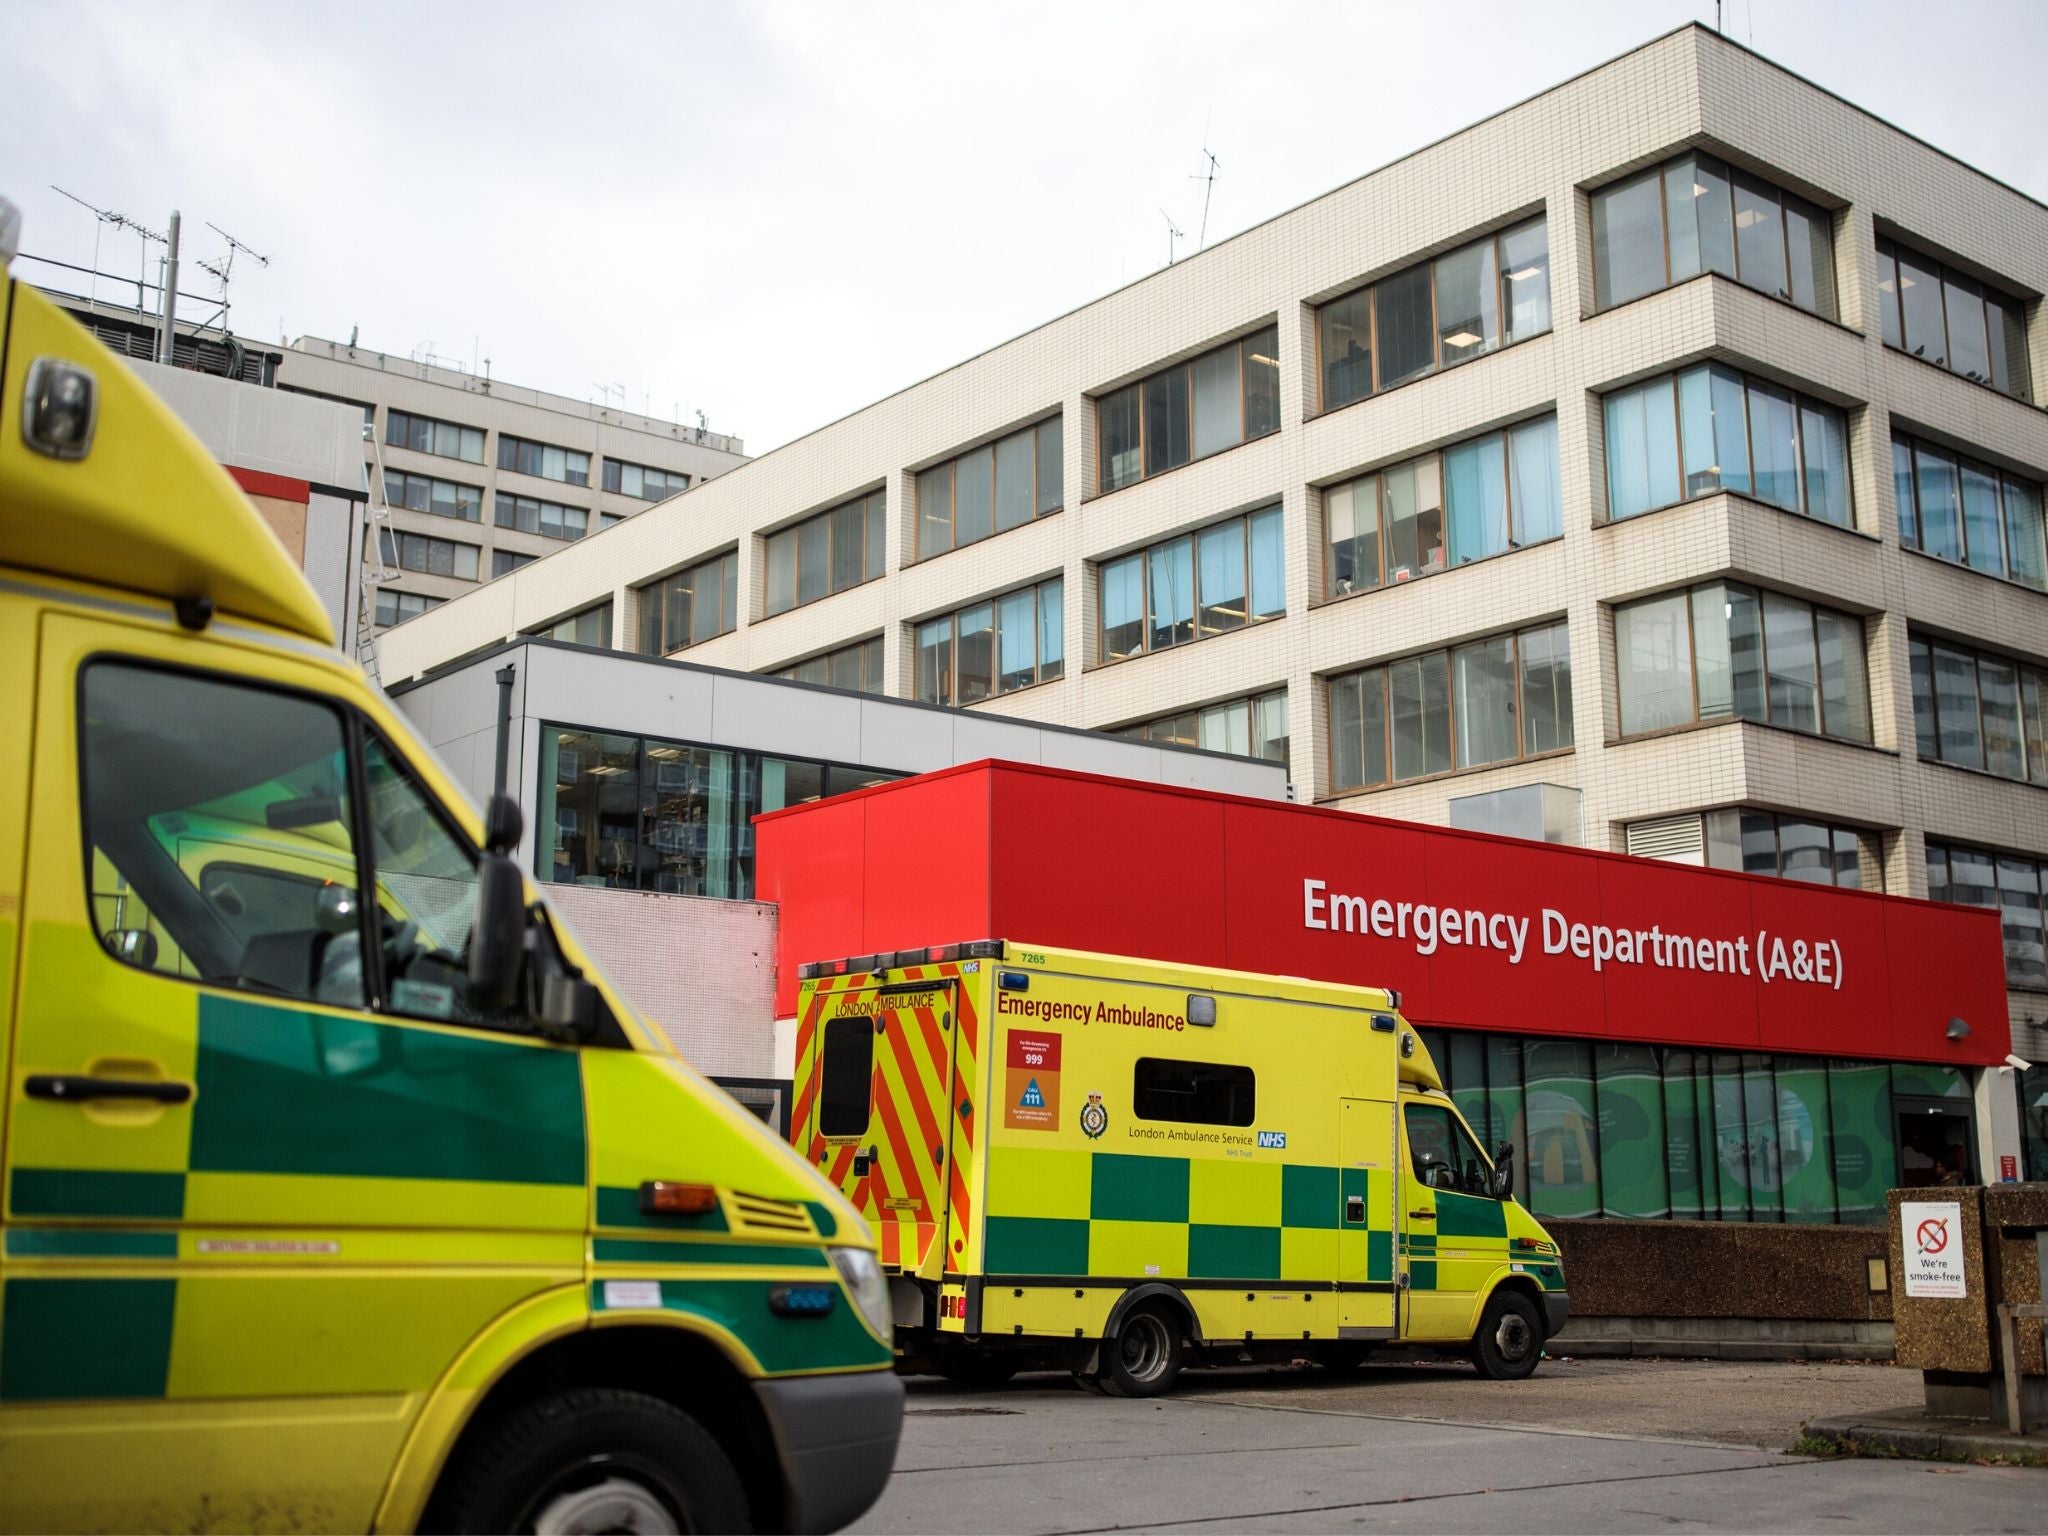 Last month also saw ambulances attend nearly 800,000 incidents – making it the busiest month ever